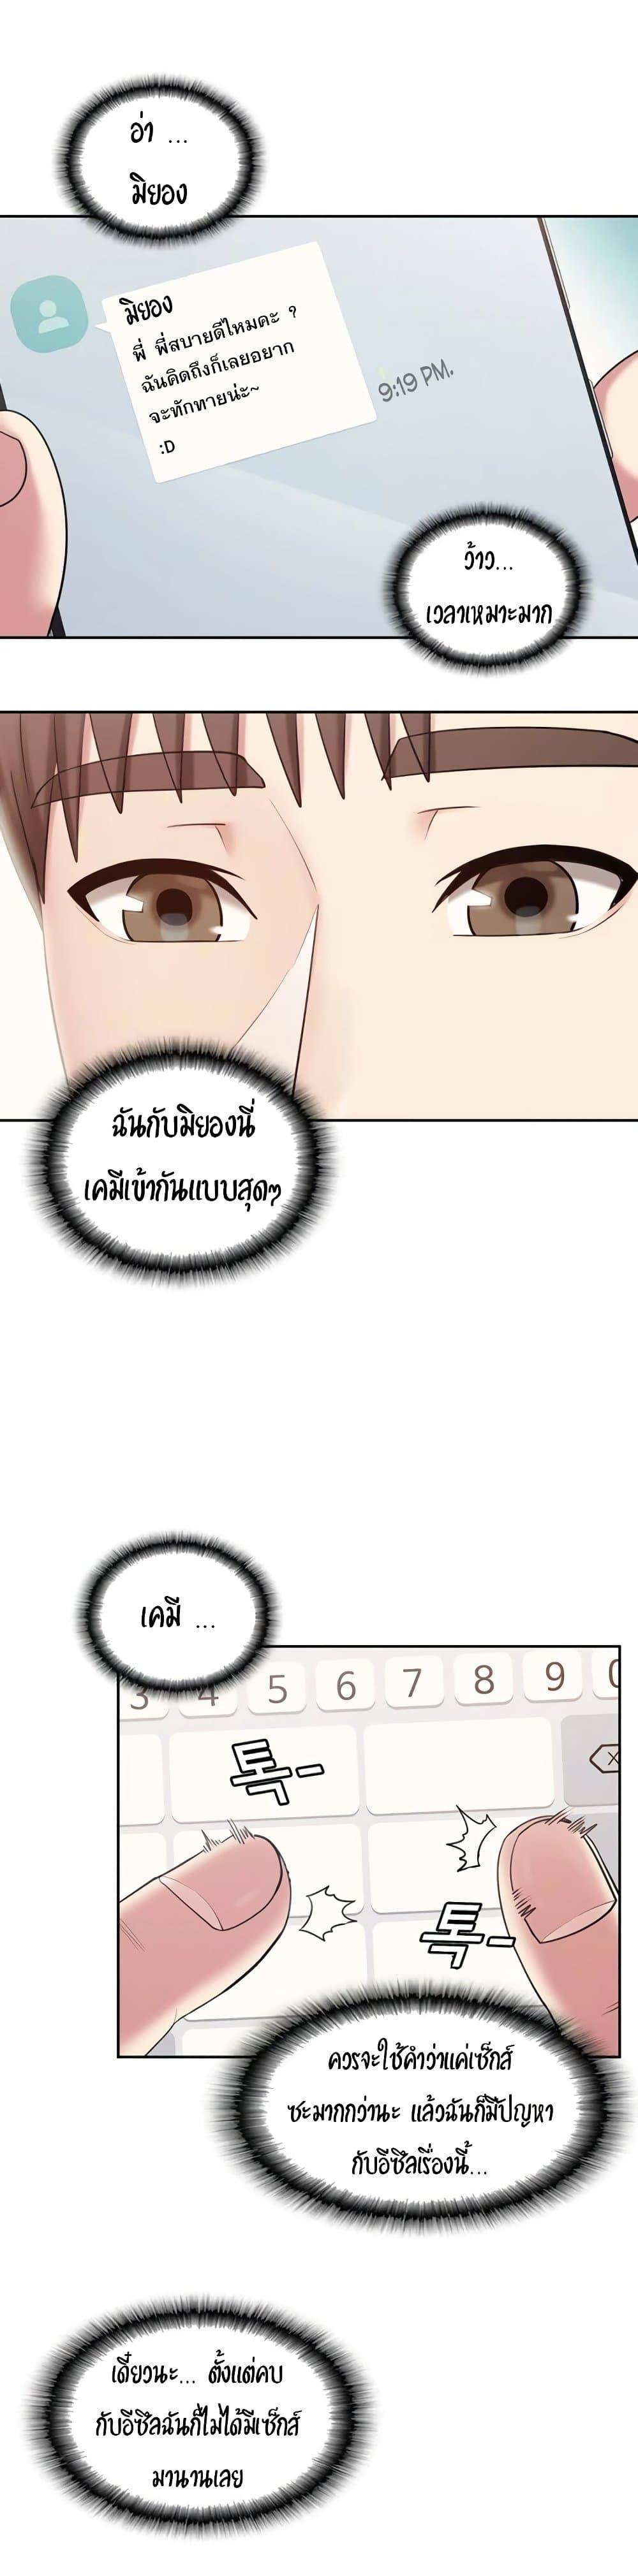 Sexual Consulting 2 ภาพ 20